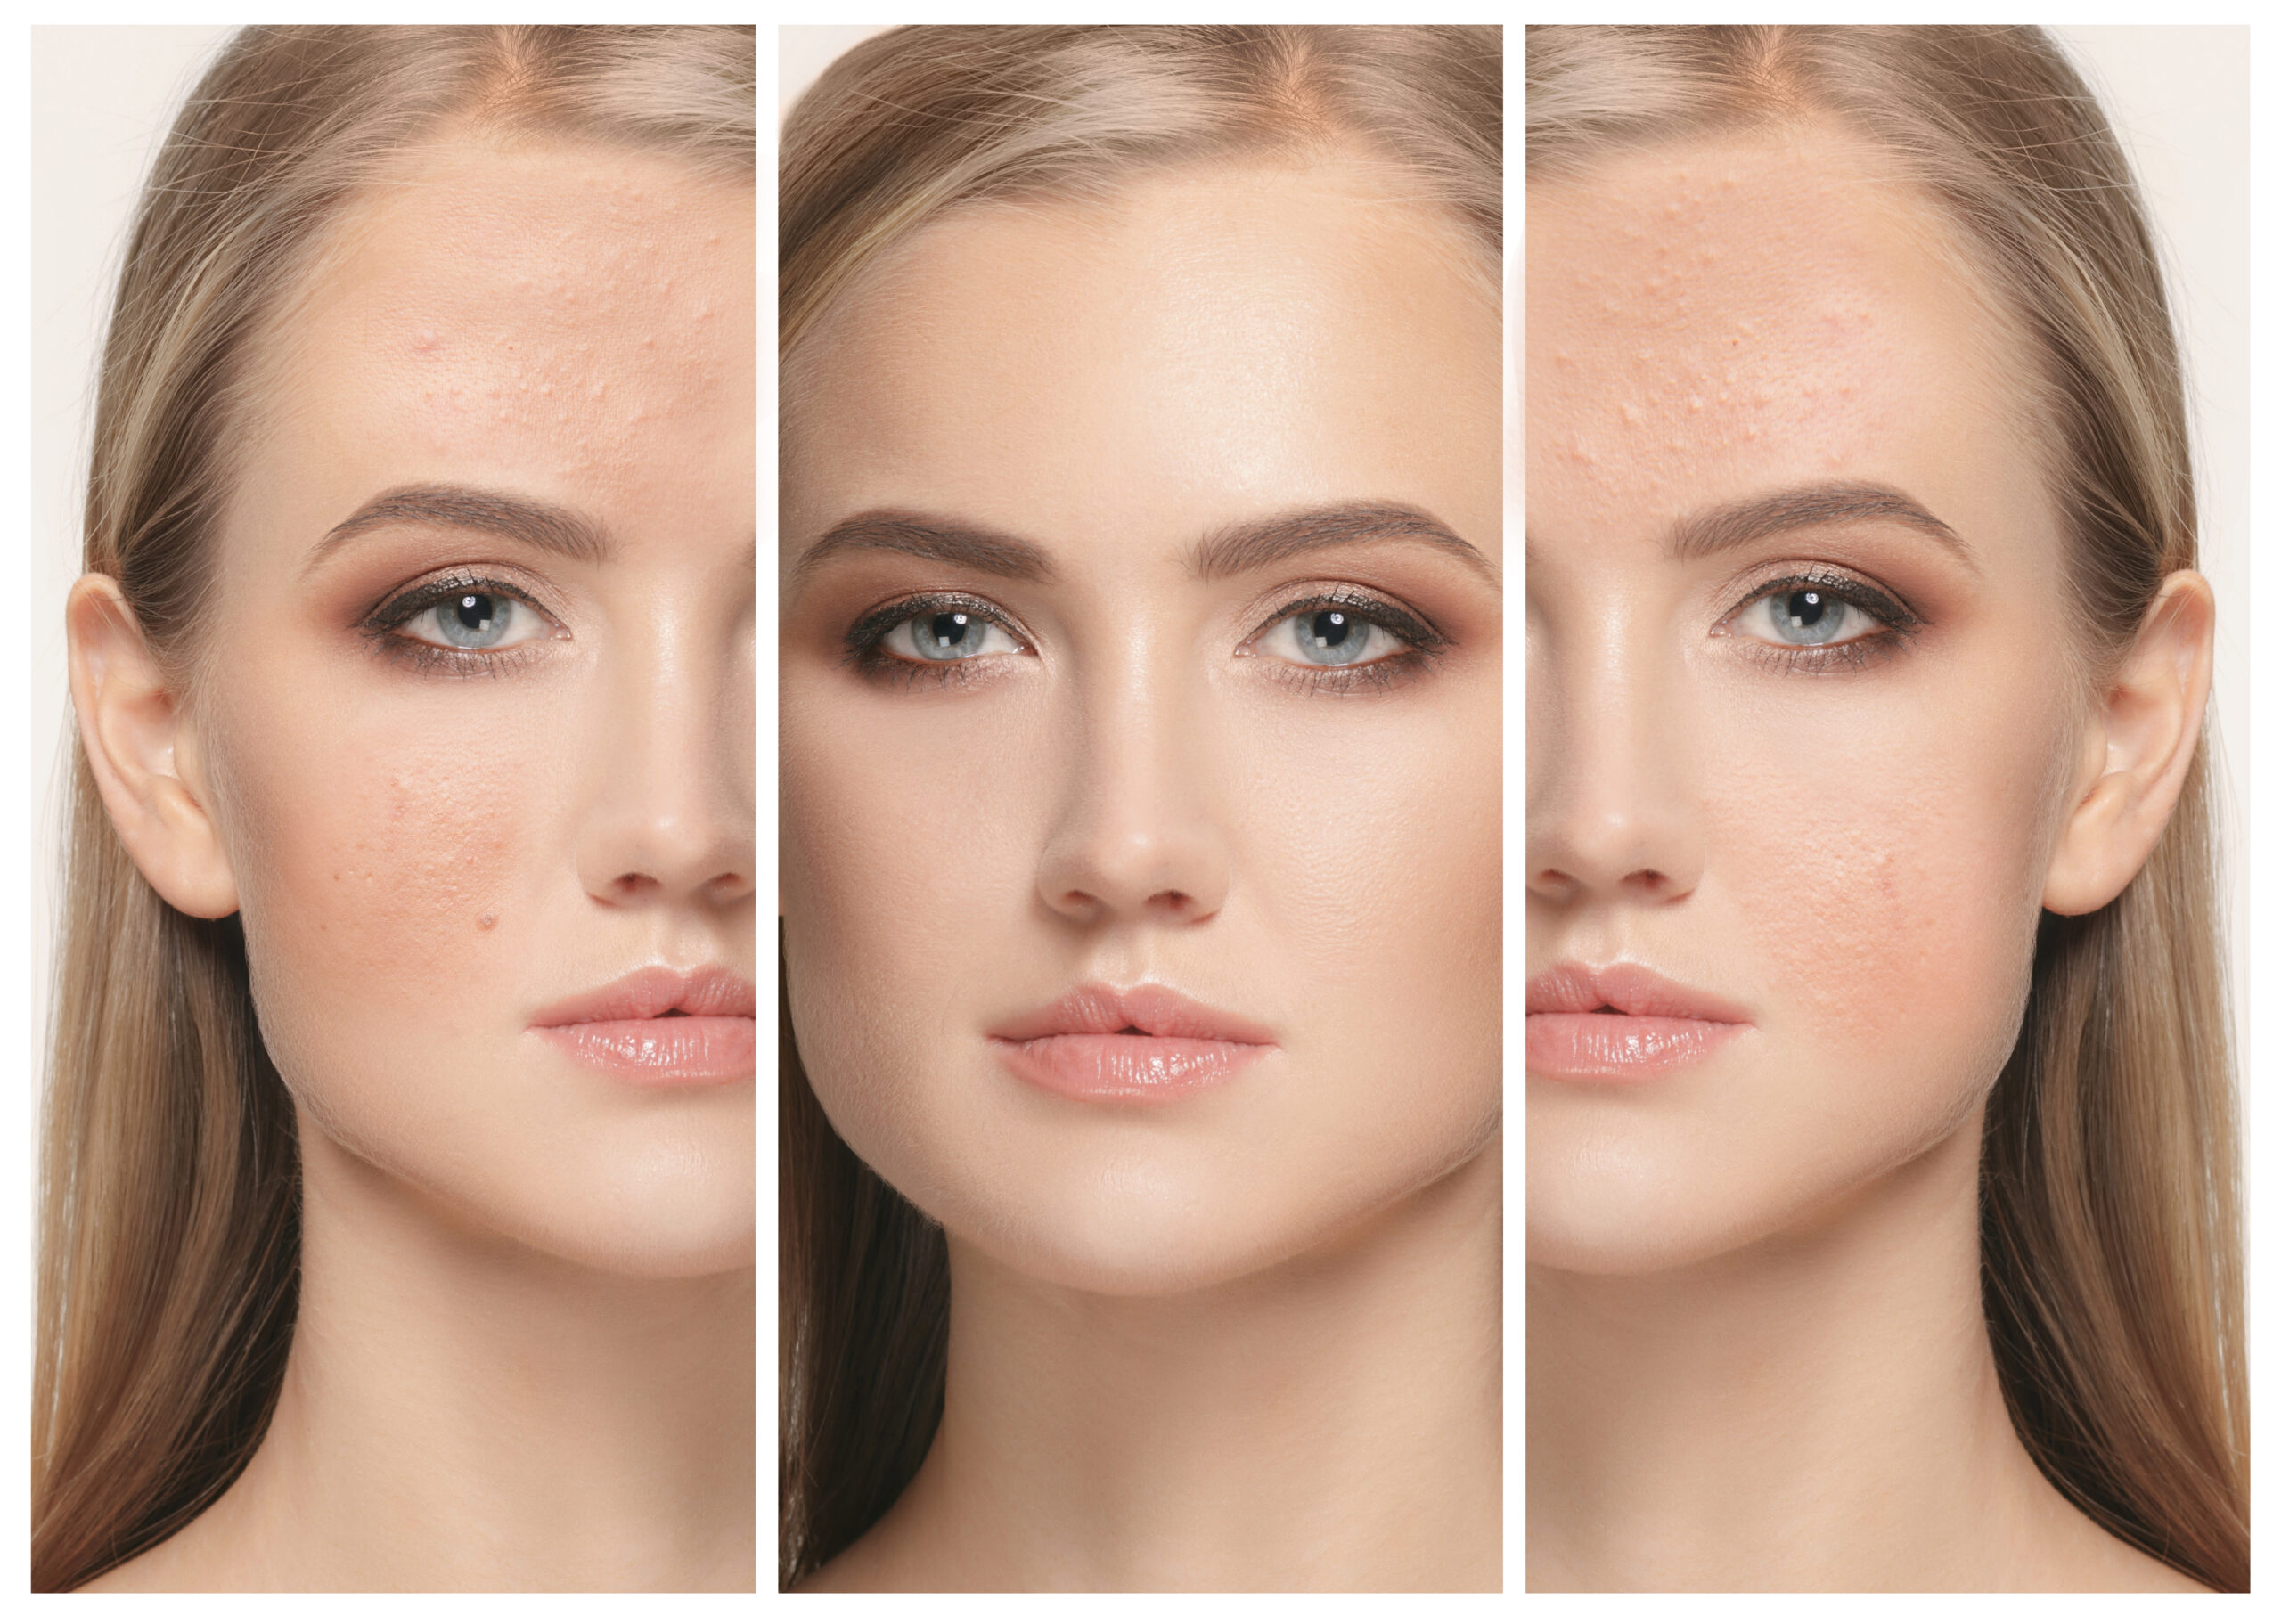 The female face of woman before and after treatment, collage